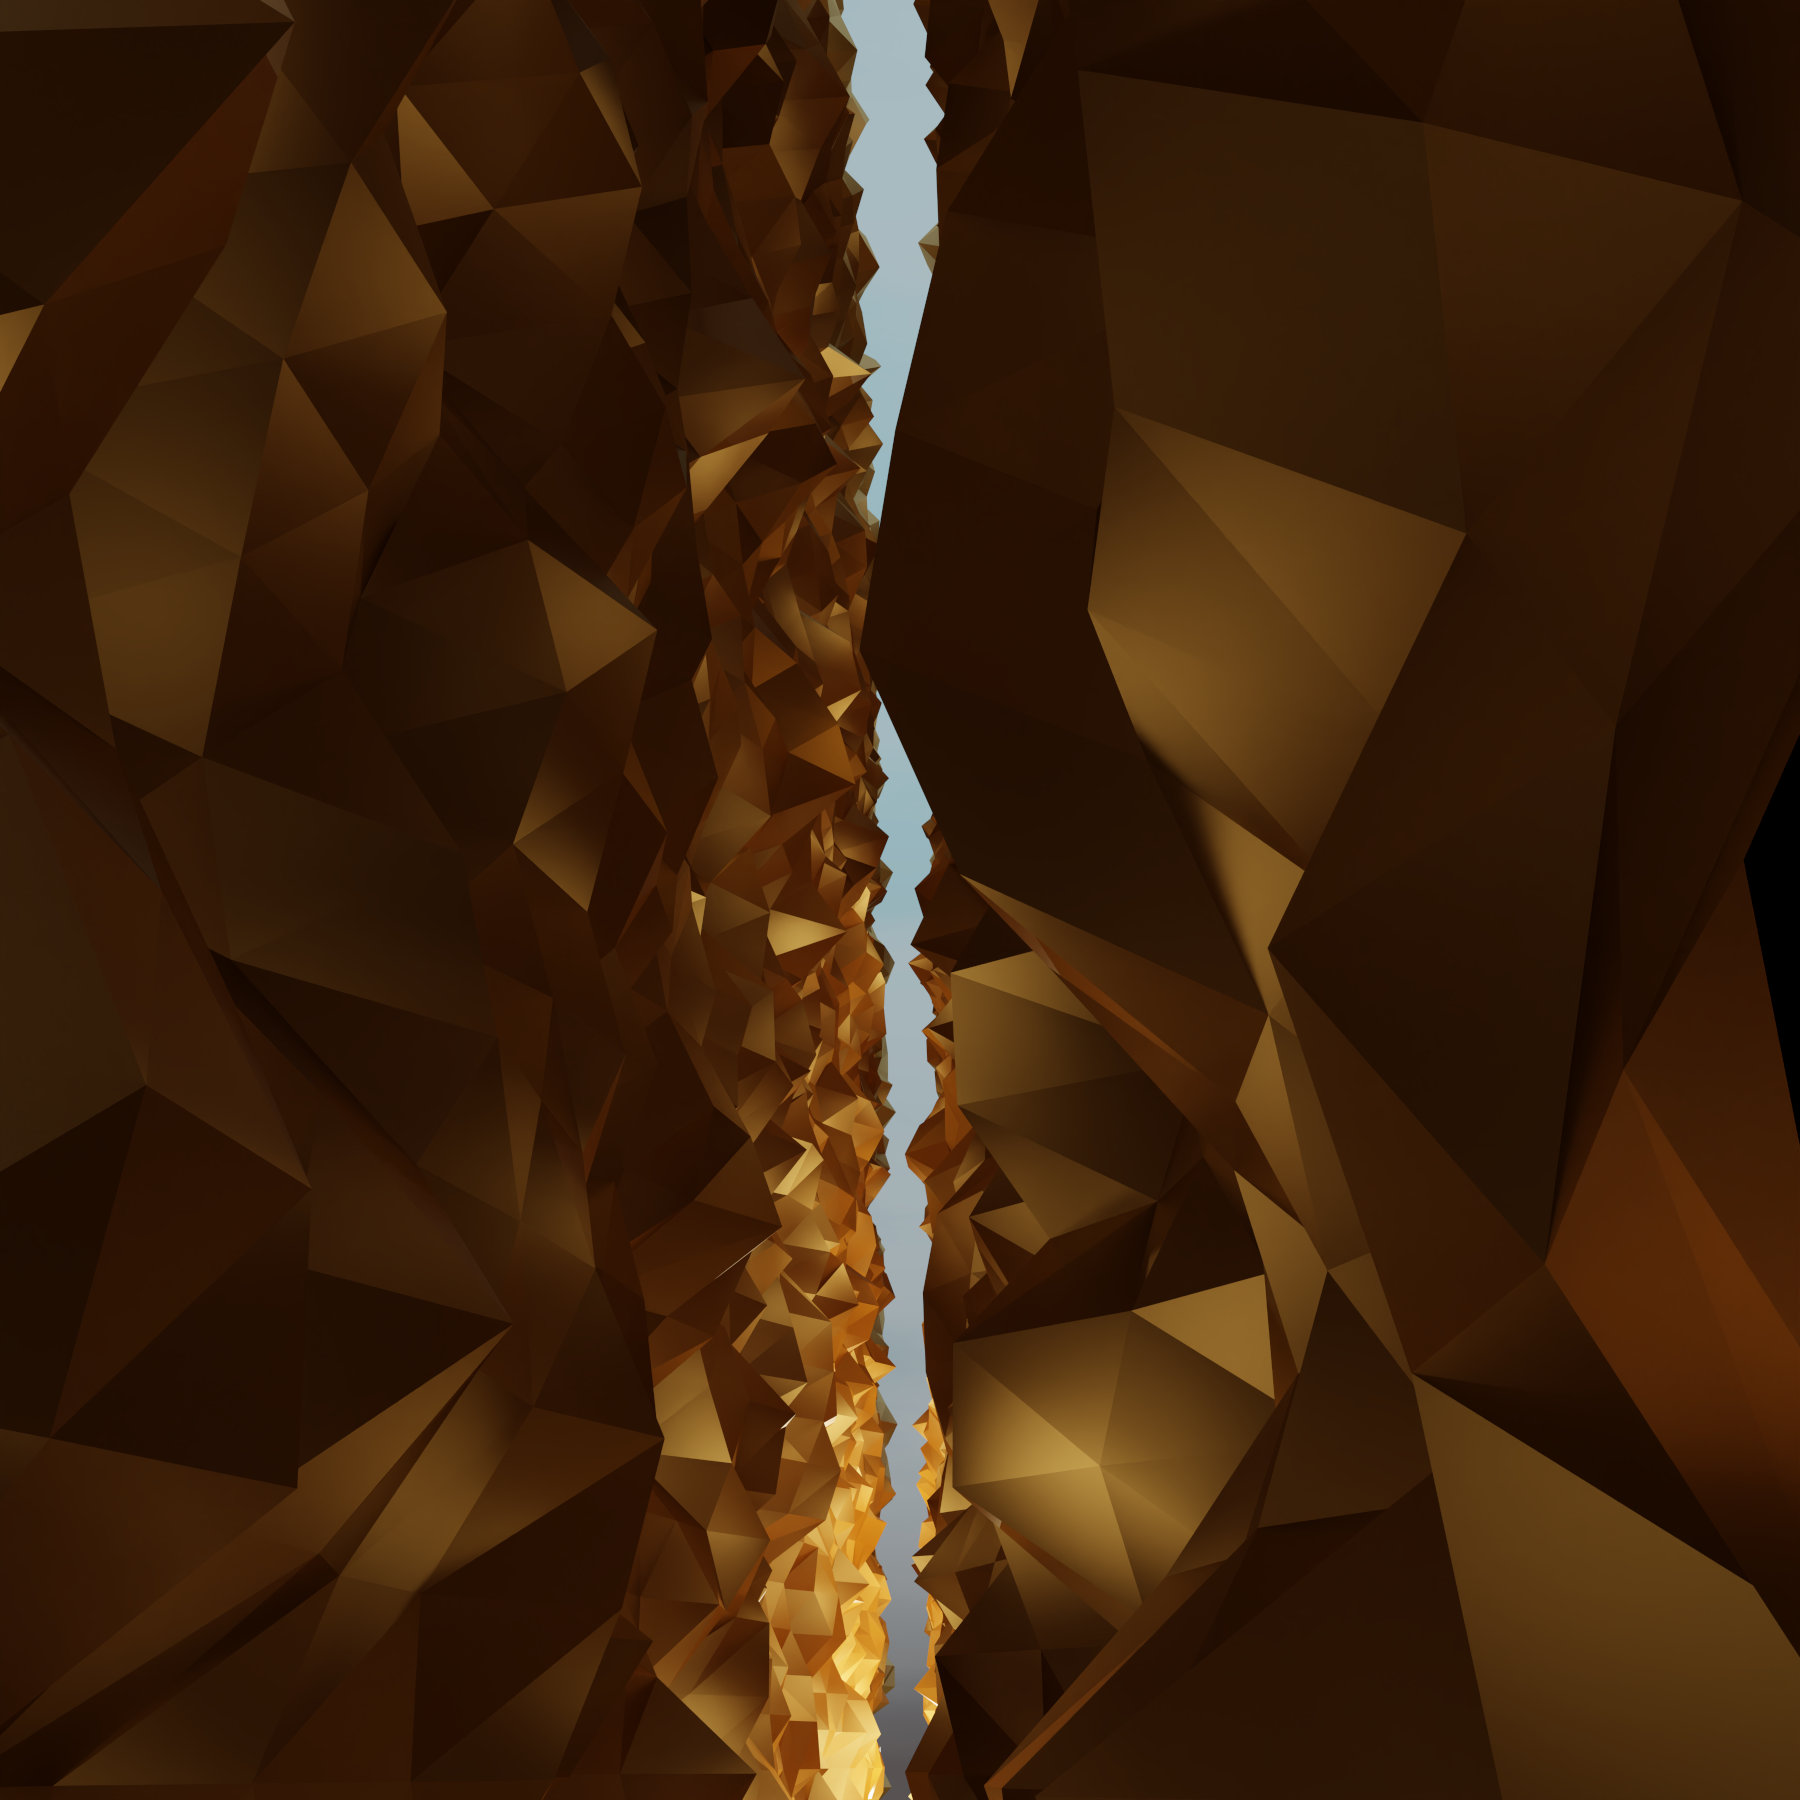 Virtual abstract scenery, Abstract digital art, Raytracing, Computer-rendered image, 2022. The viewer stands in the middle of a gap in a broken golden cube and sees light at the end of the gap.